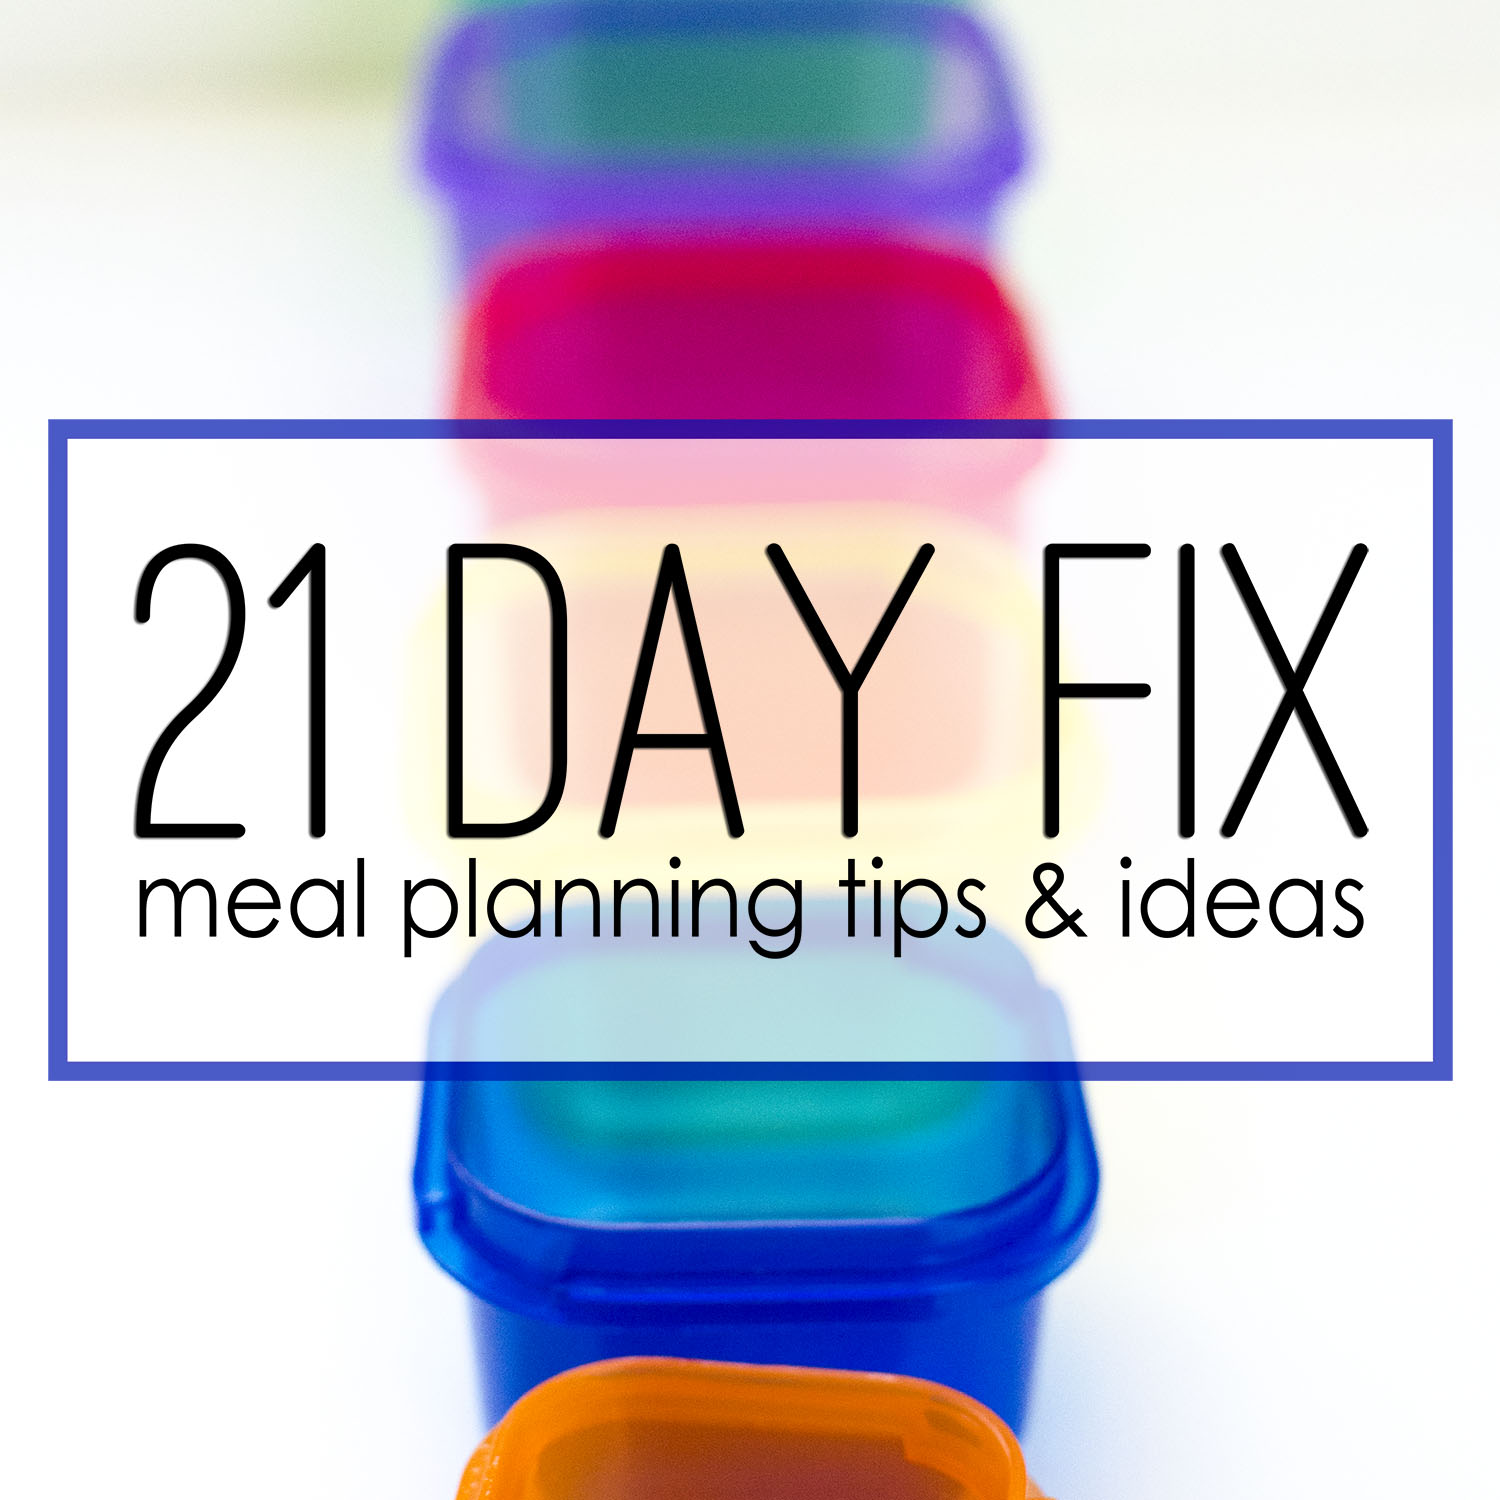 Crystal P Fitness and Food: 5 Day 21 Day Fix Meal Plan for Summer